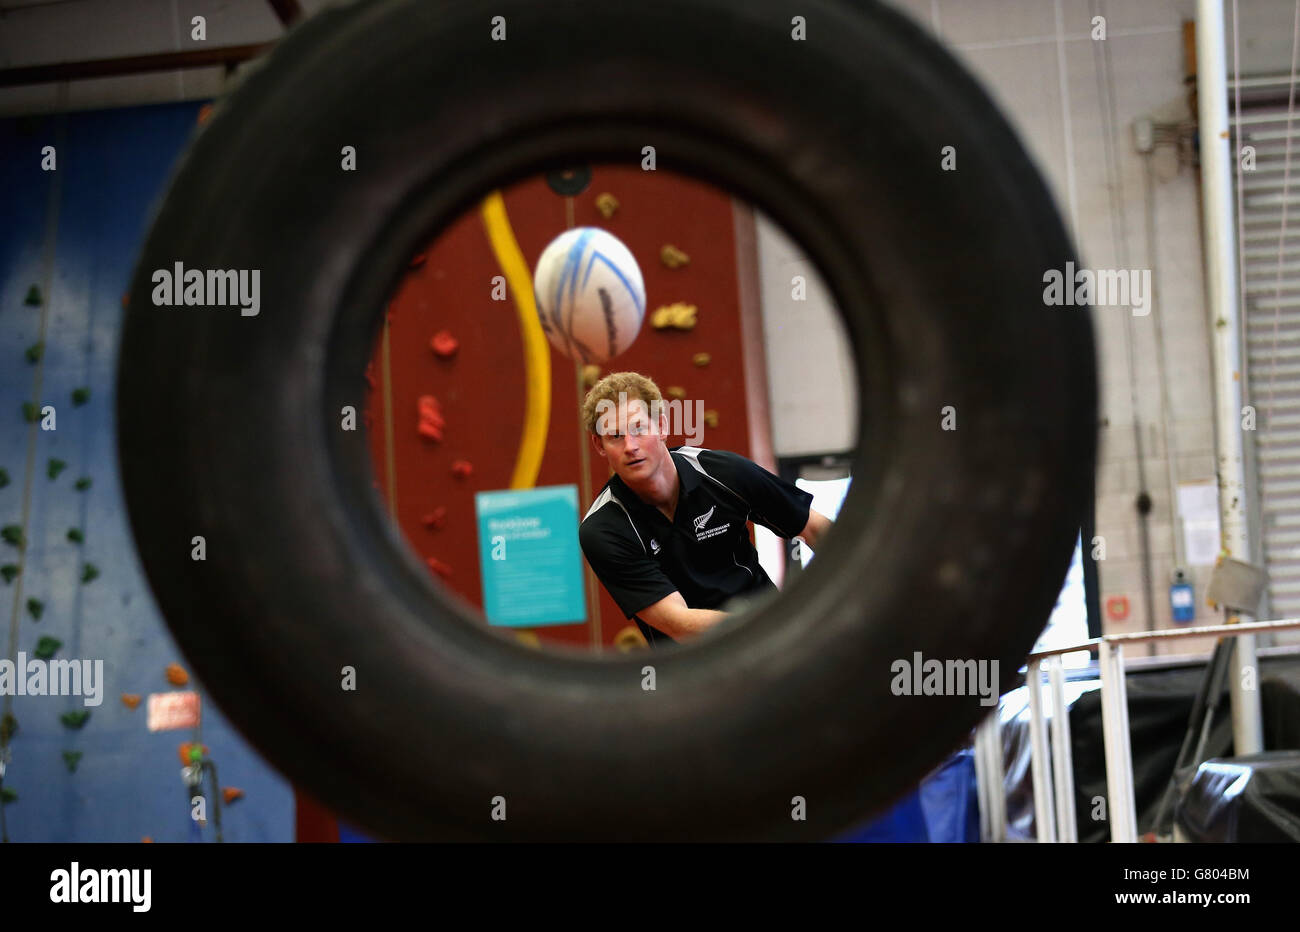 Prince Harry, throwa a rugby ball through a tyre as he takes part in a training excercise at the AUT Millennium Institute of Sport and Health, in Auckland, on the eighth and final day of his visit to New Zealand. Stock Photo